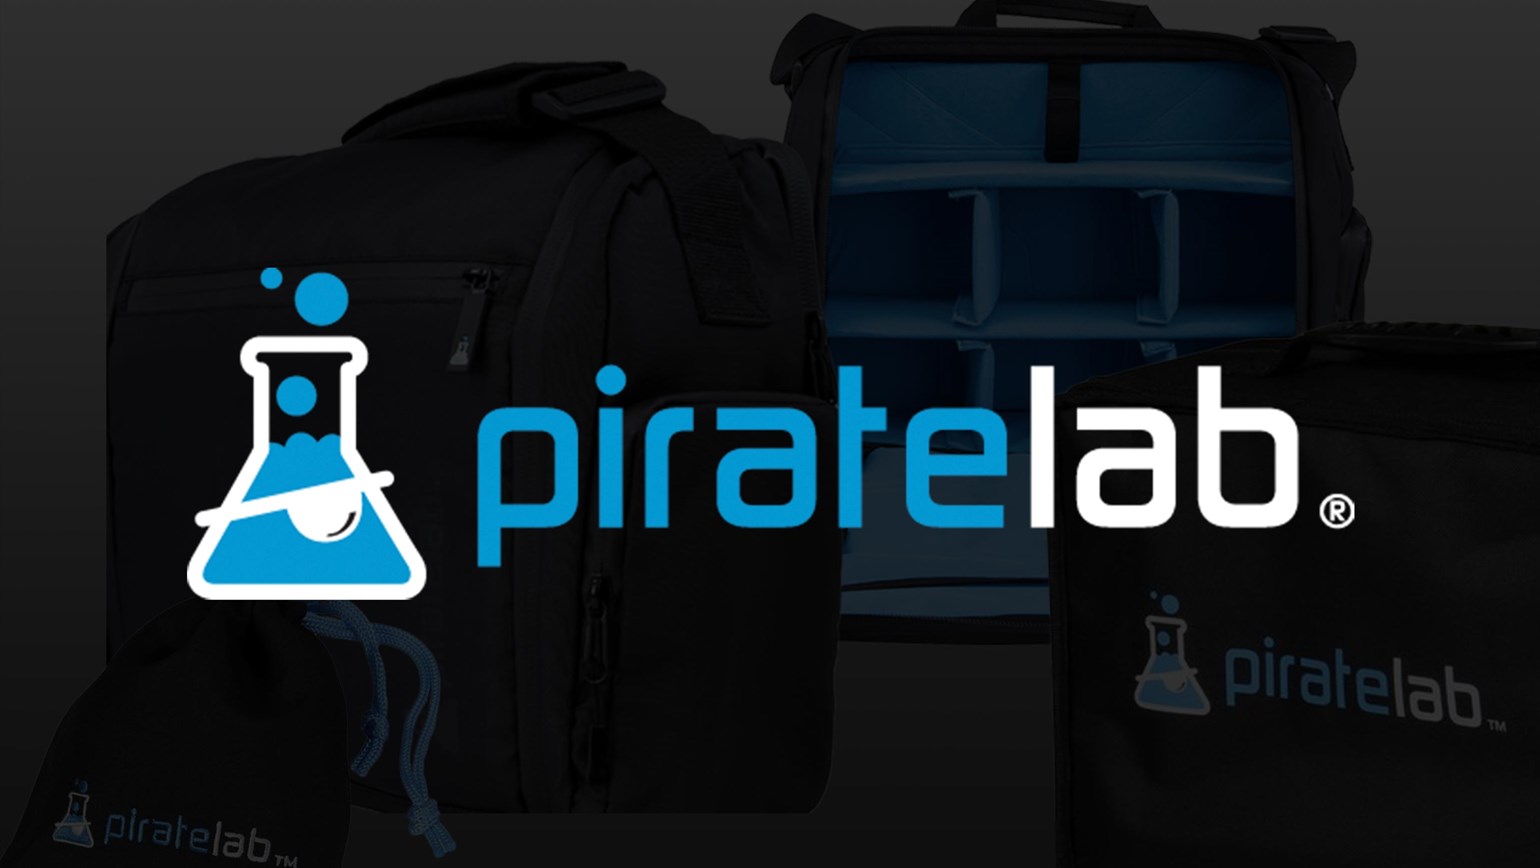 Pirate Lab Products Available to List